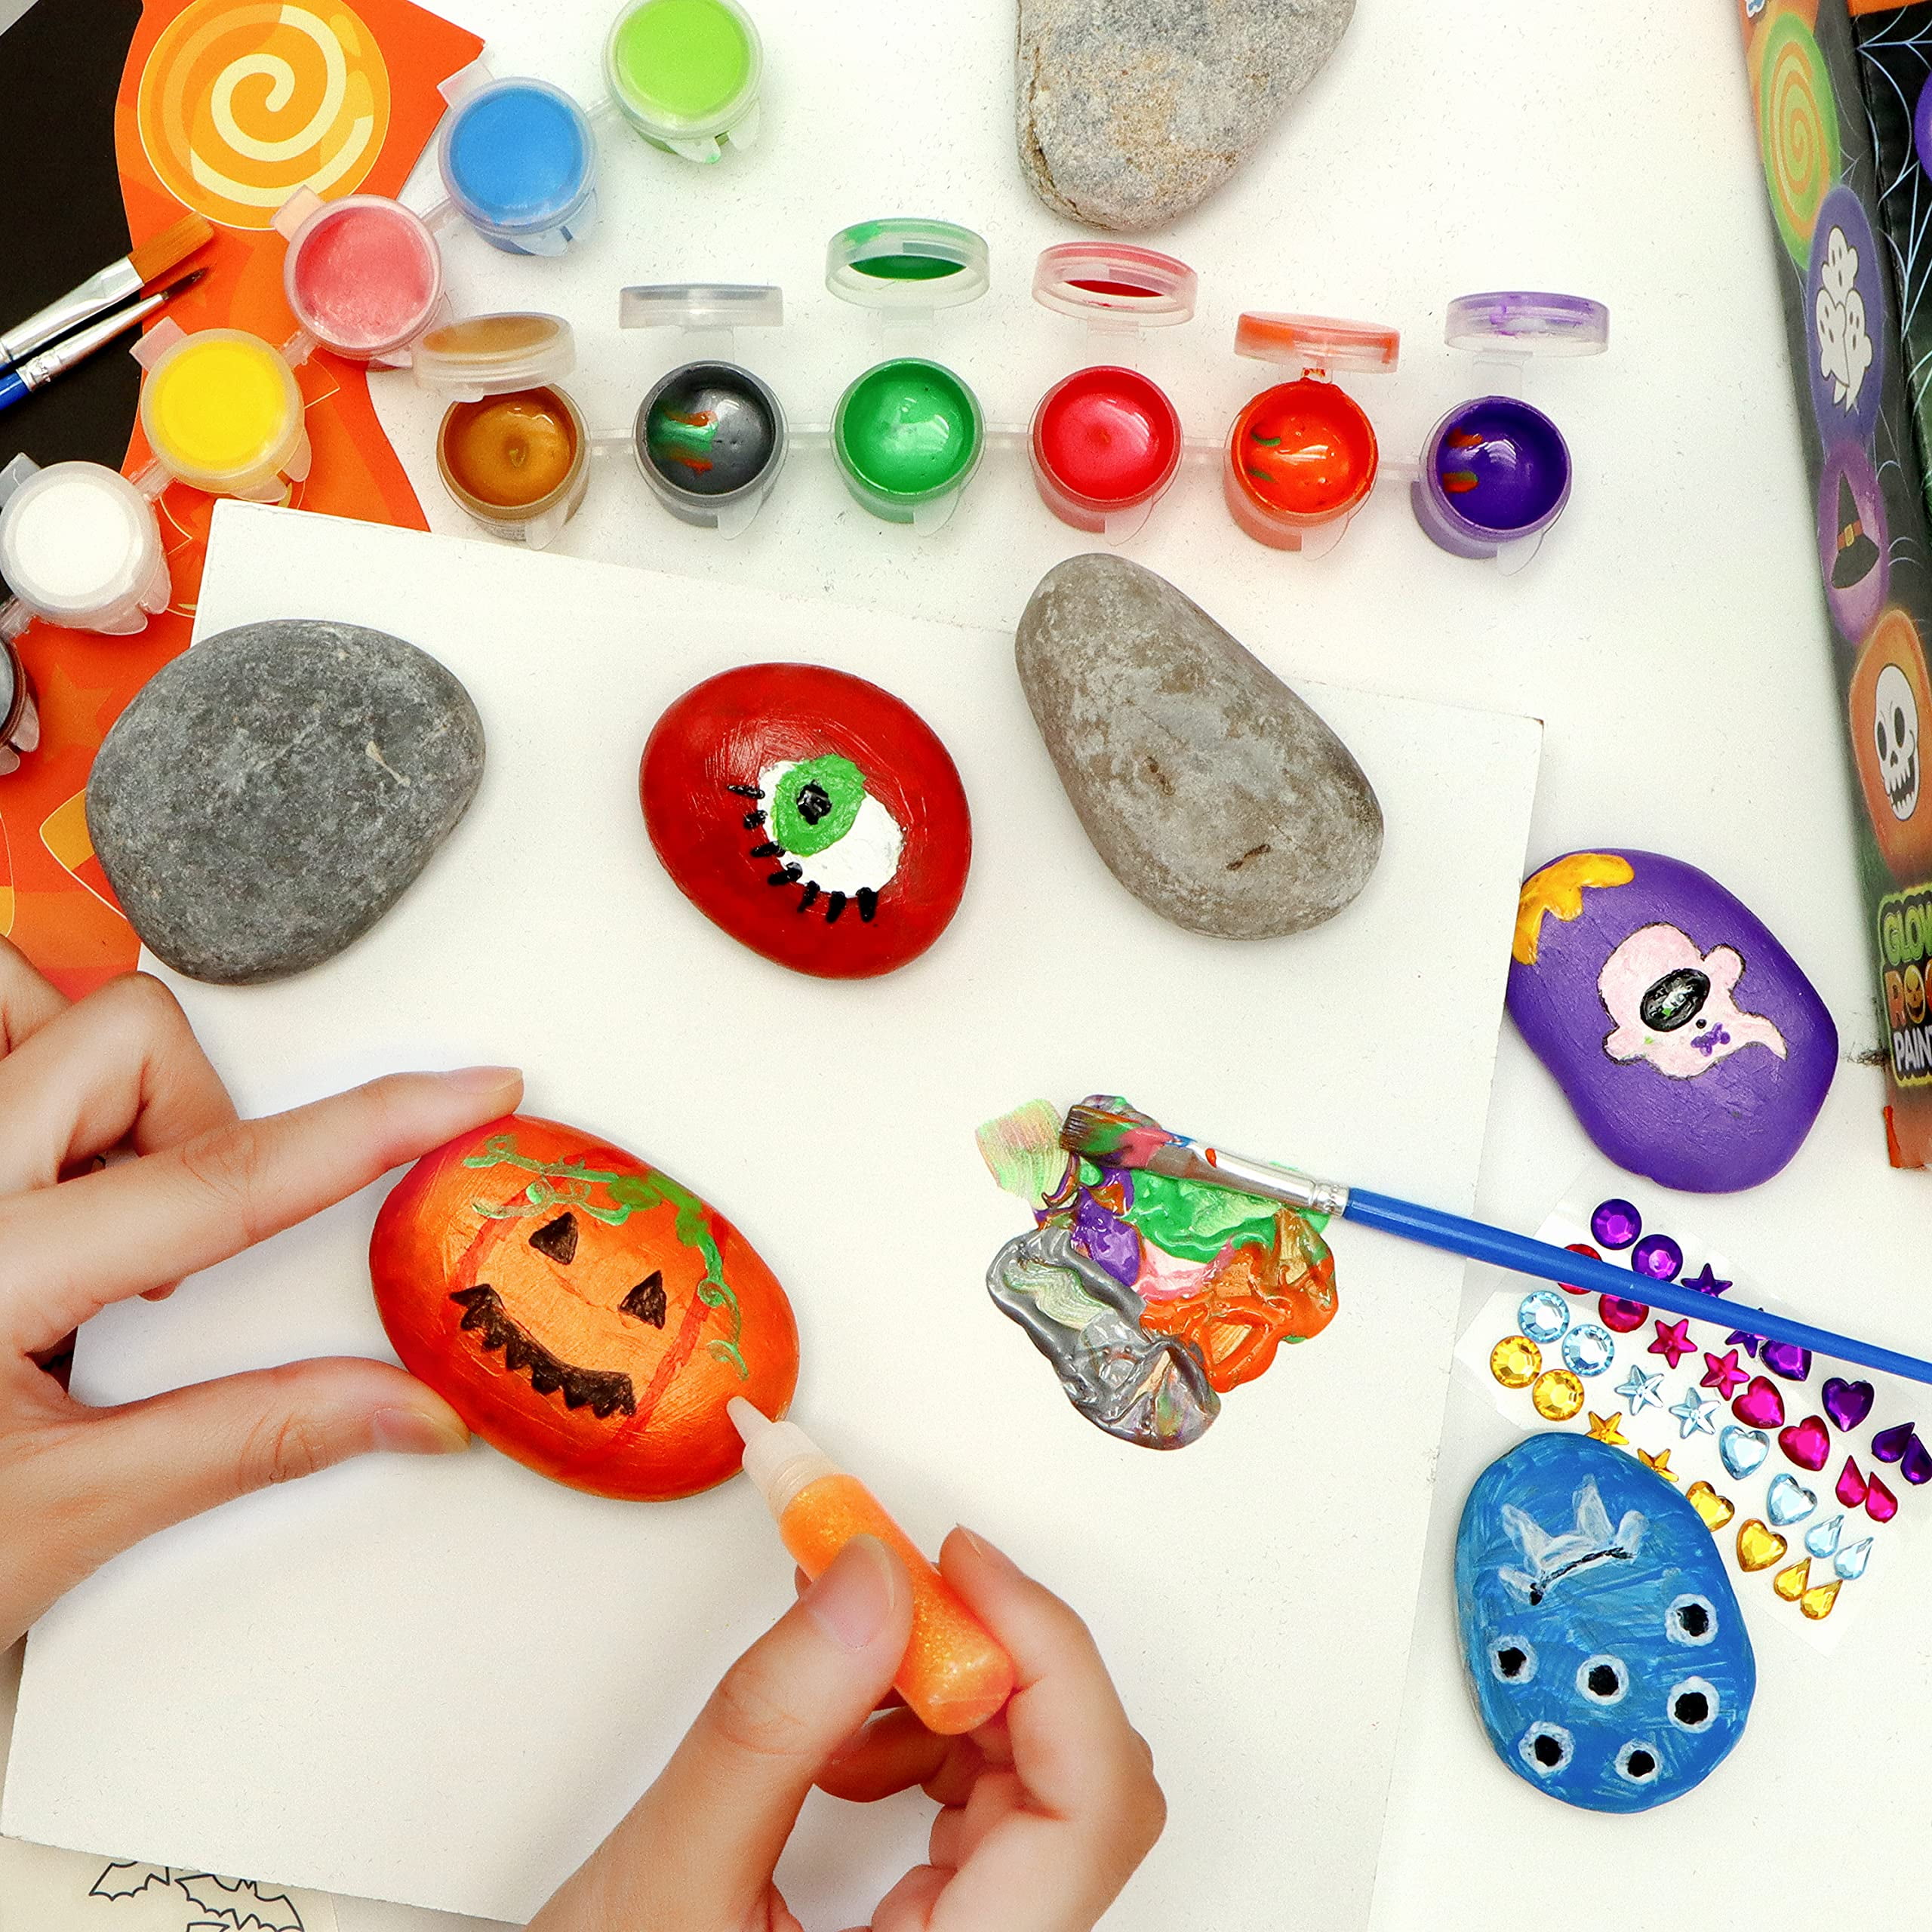 Halloween Rock Painting for Kids using Physics and Forces!